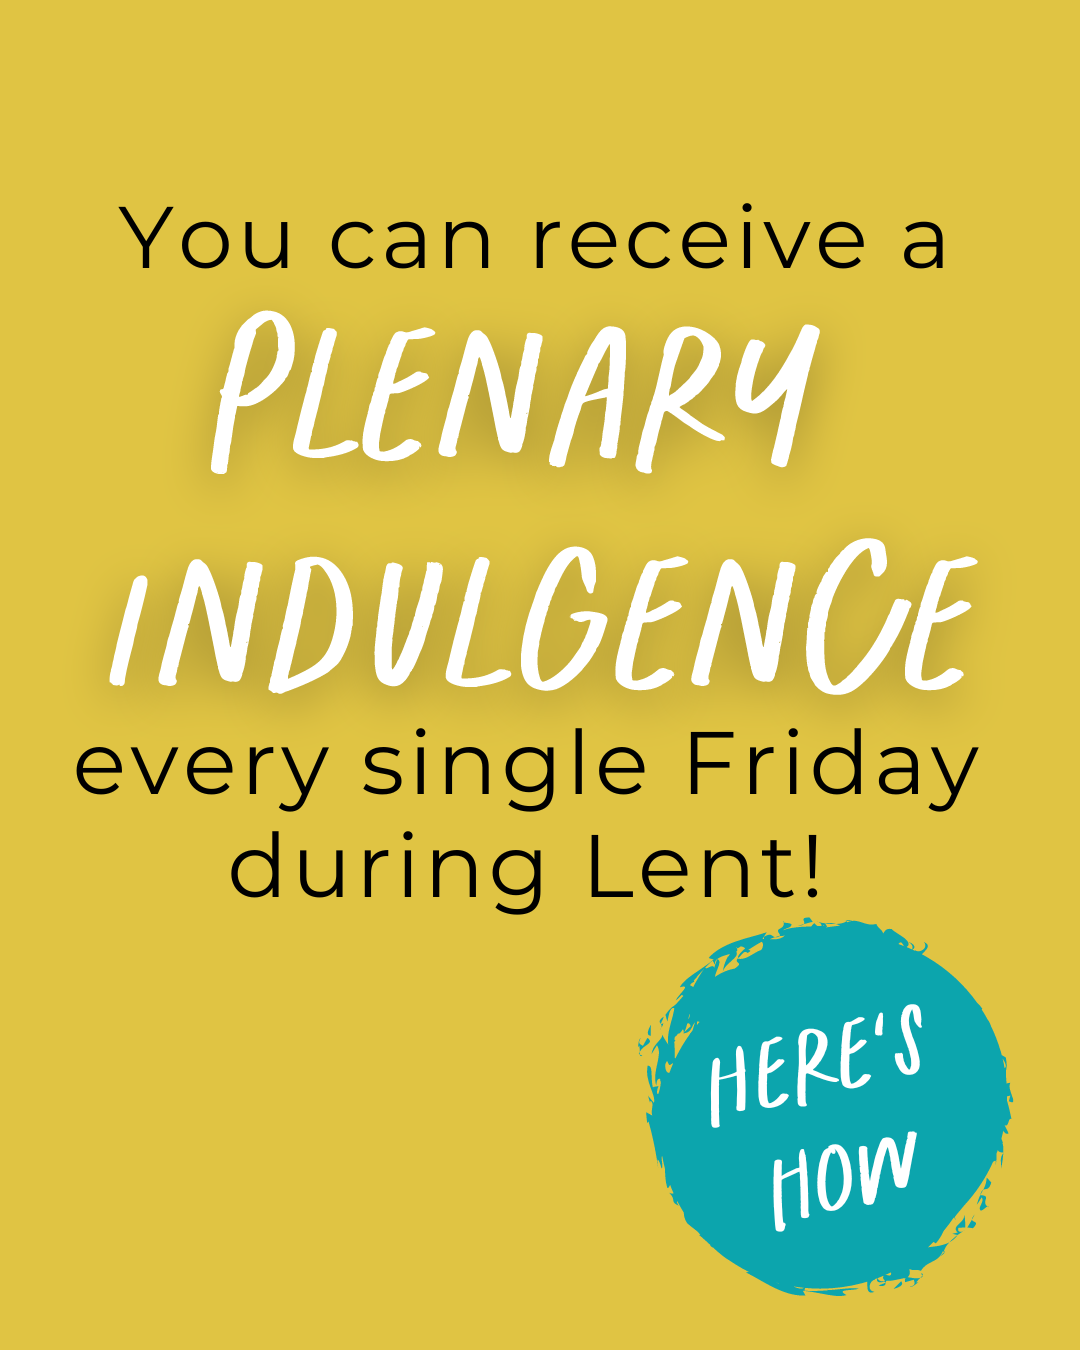 Here's How to Gain Plenary Indulgences During Lent • Cultivating Catholics